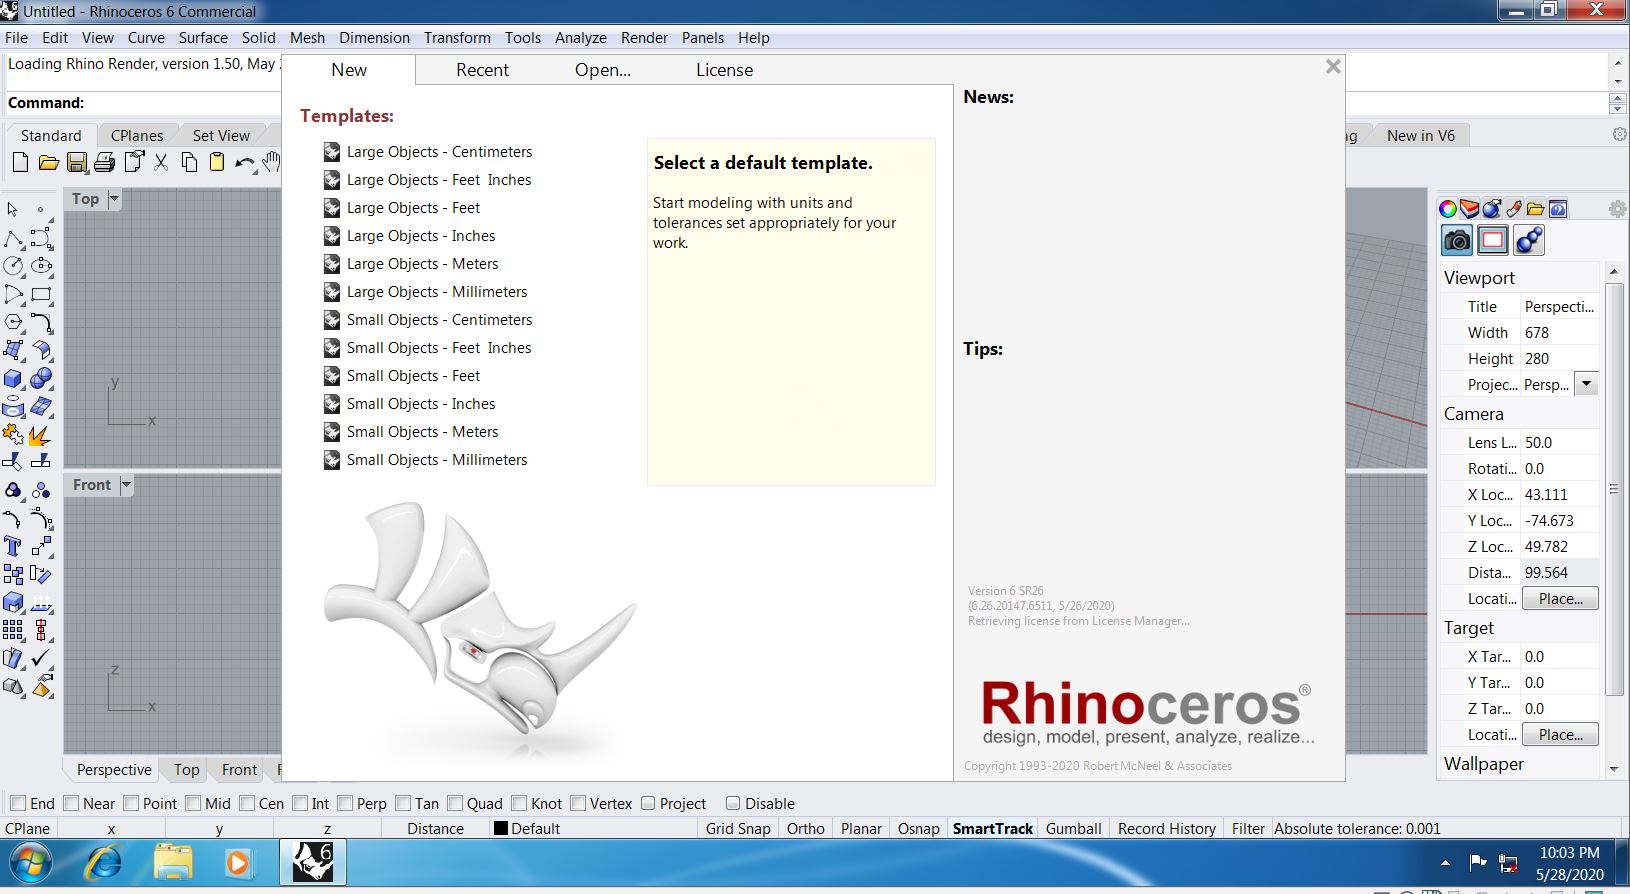 Working with Rhinoceros 6.26.20147.06511 full license